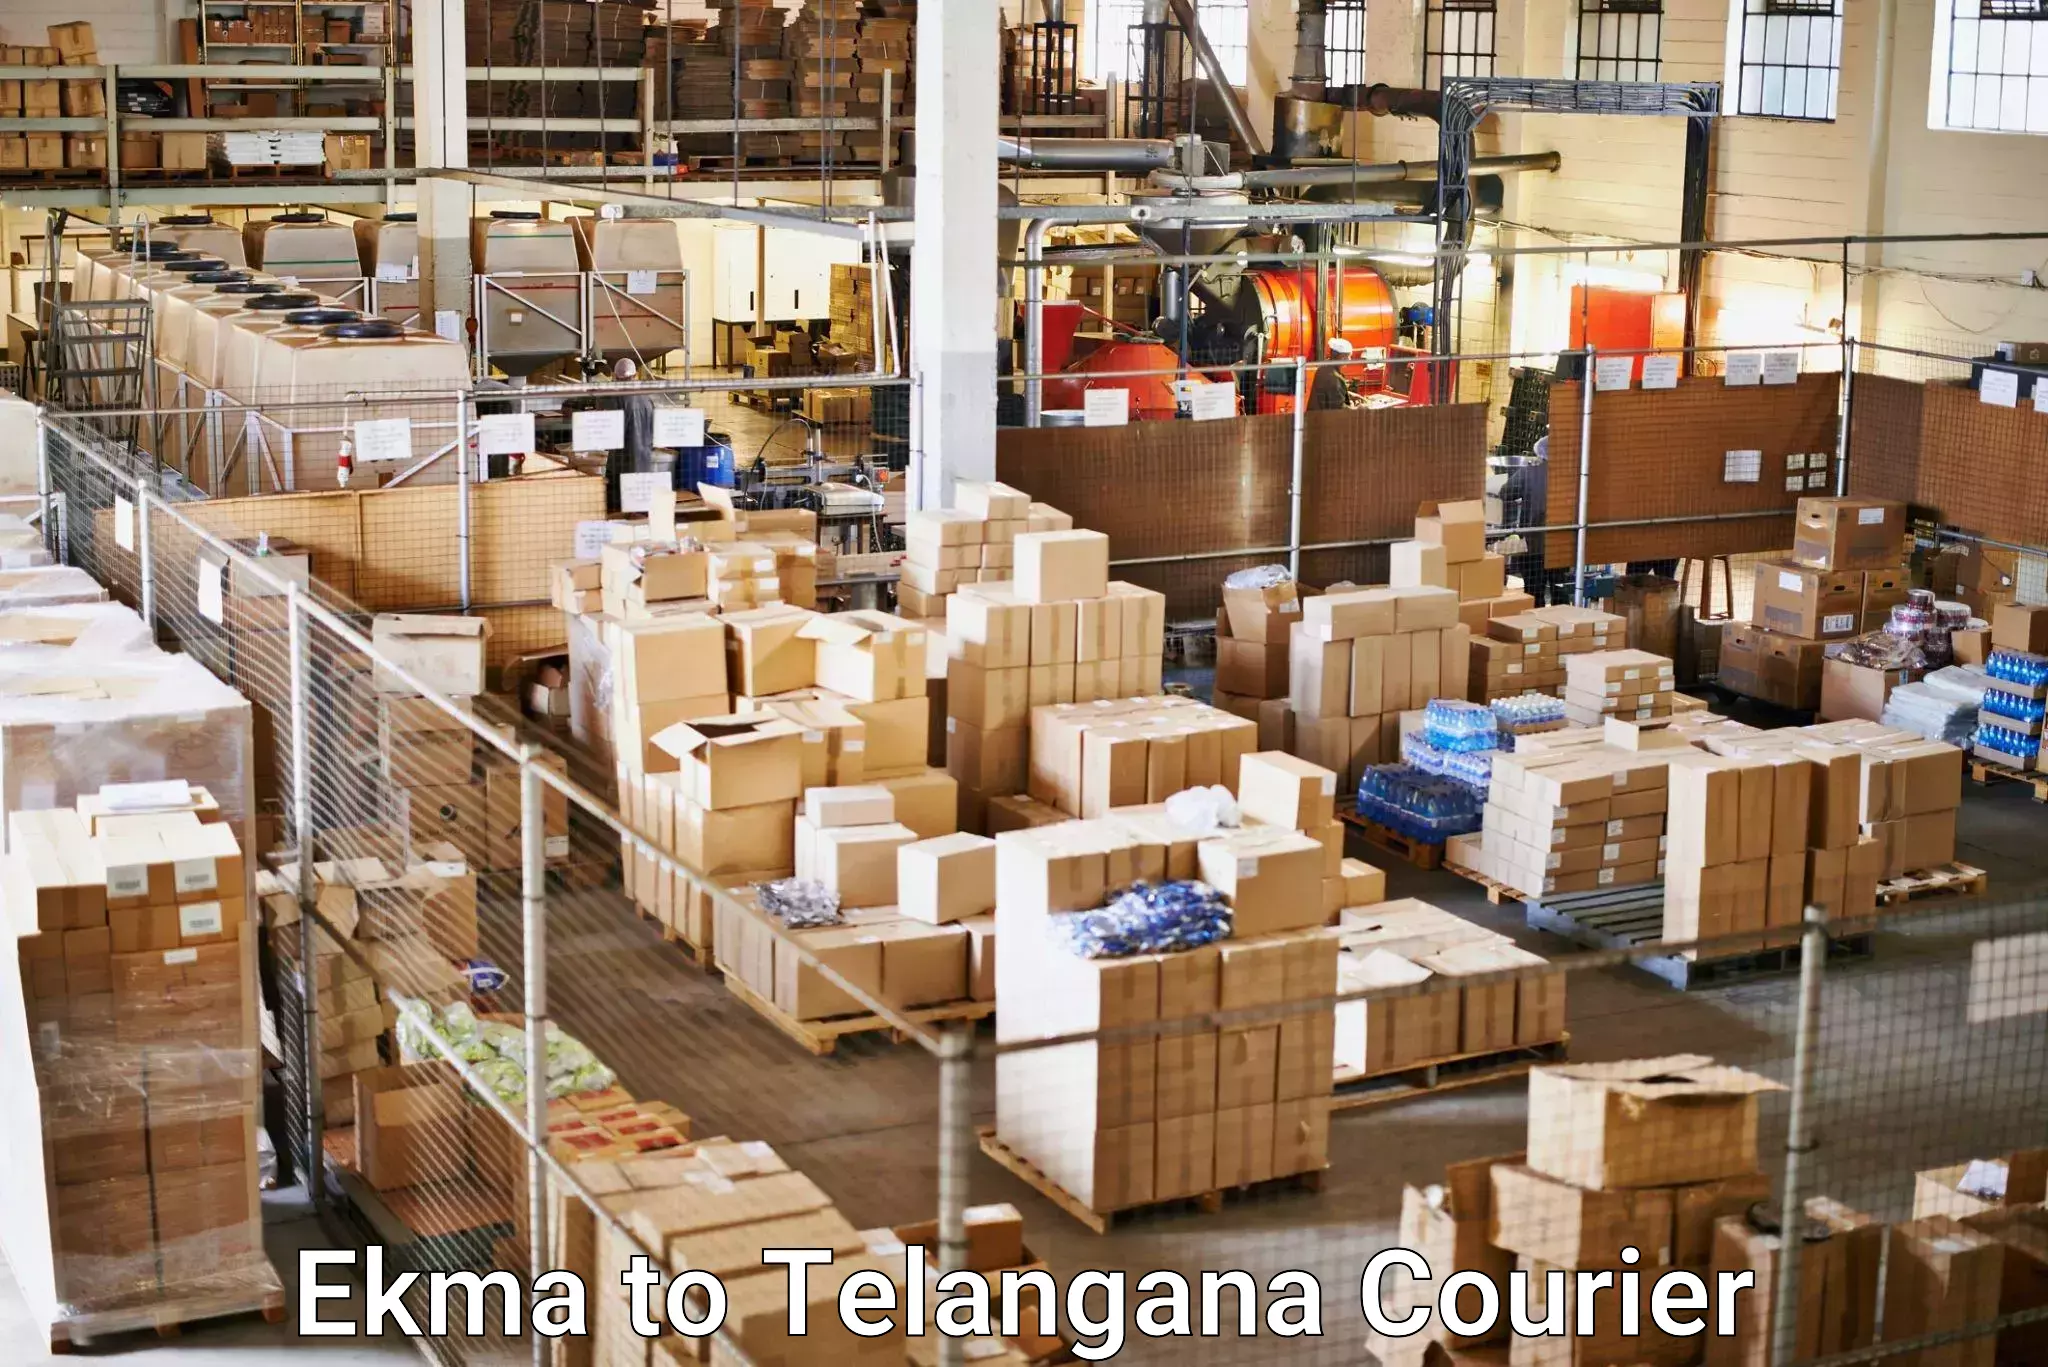 24-hour delivery options in Ekma to Telangana